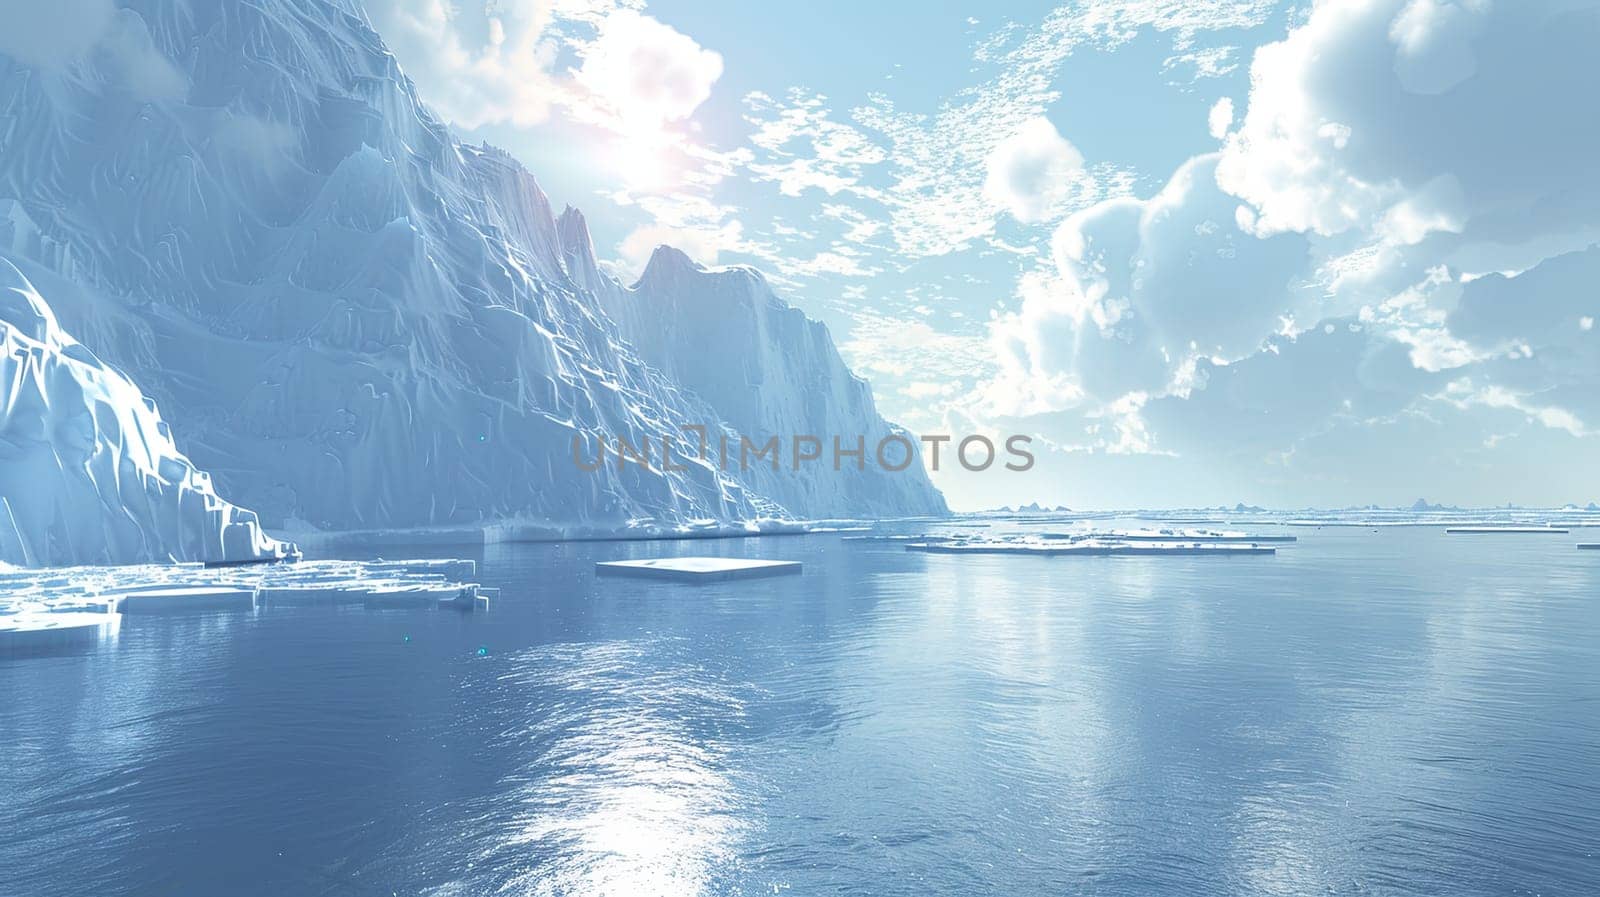 Large body of water with icebergs floating in it, showcasing the icy landscape of the Arctic region.